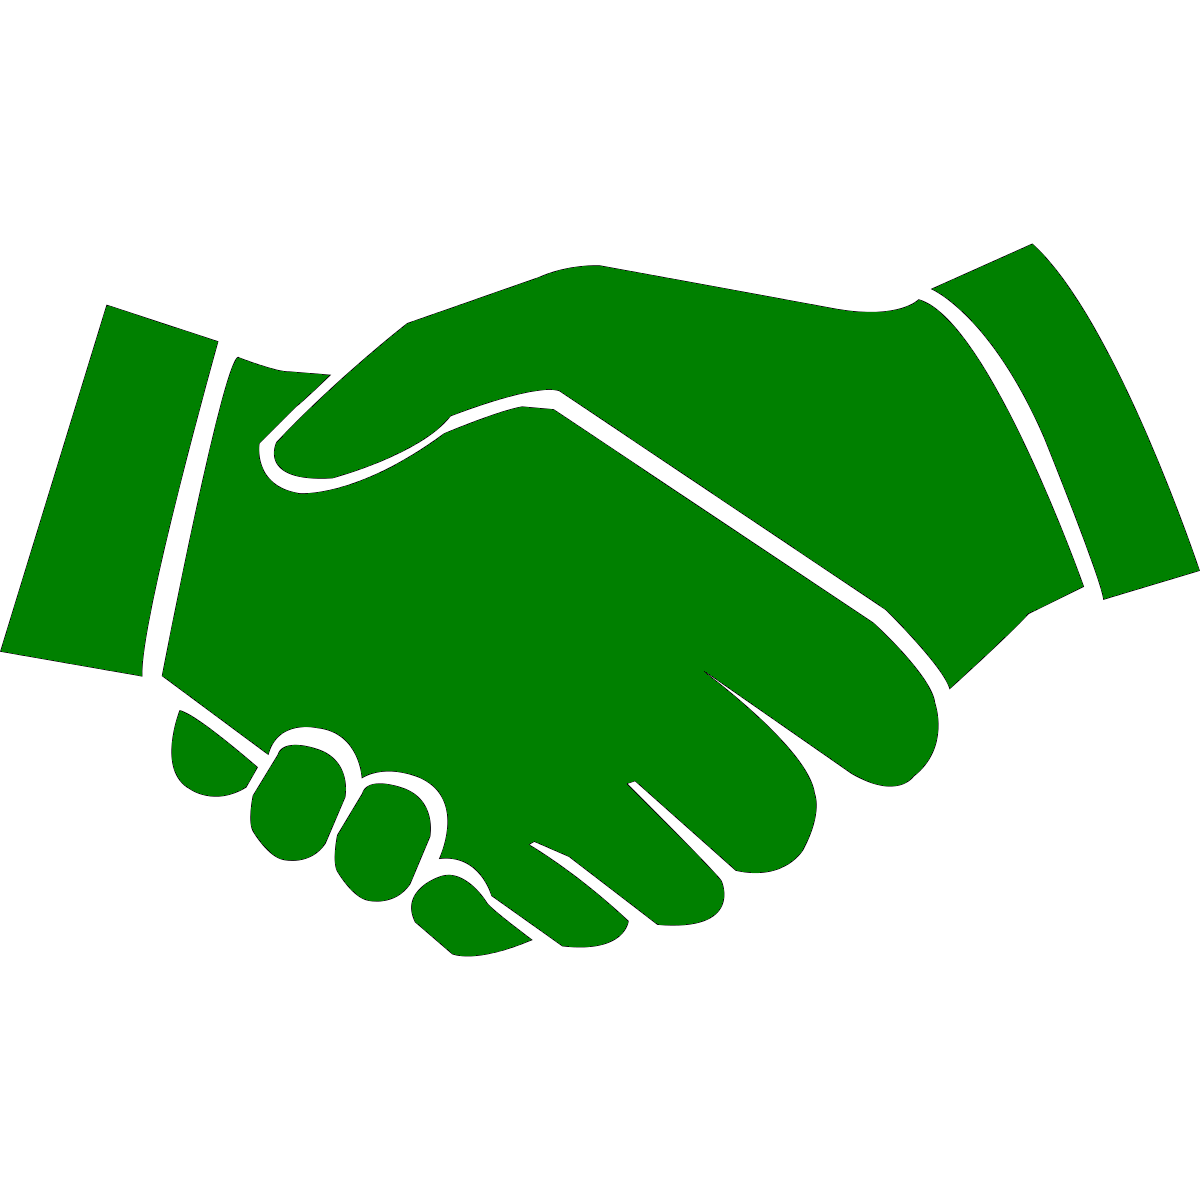 Our affiliates allies united. Handshake clipart green